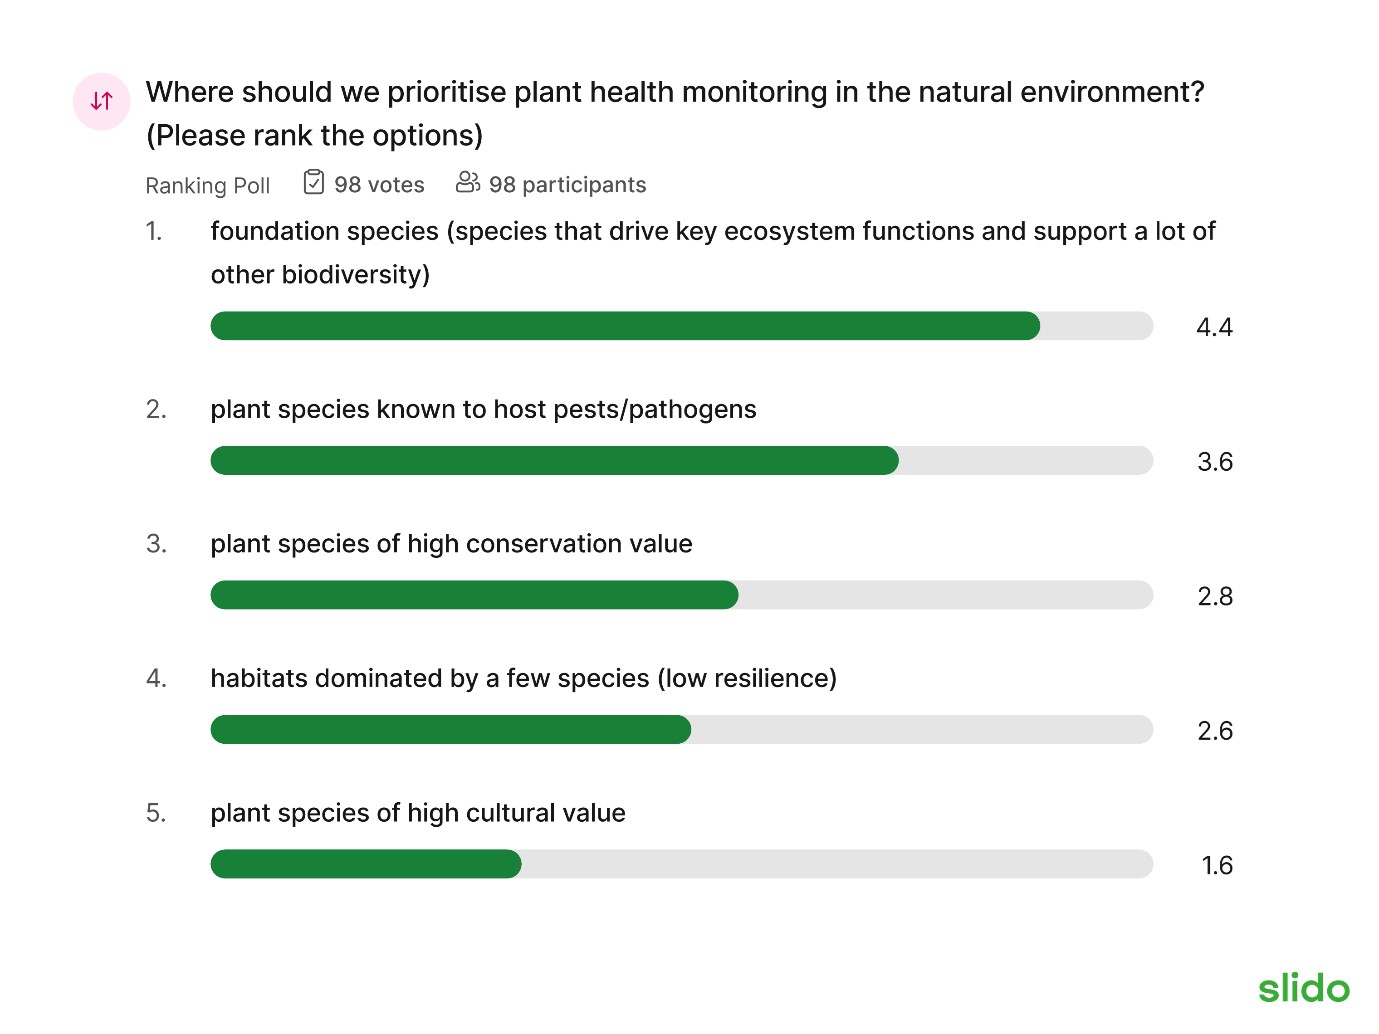 survey results for how participants ranked 5 different options for prioritising plant health monitoring